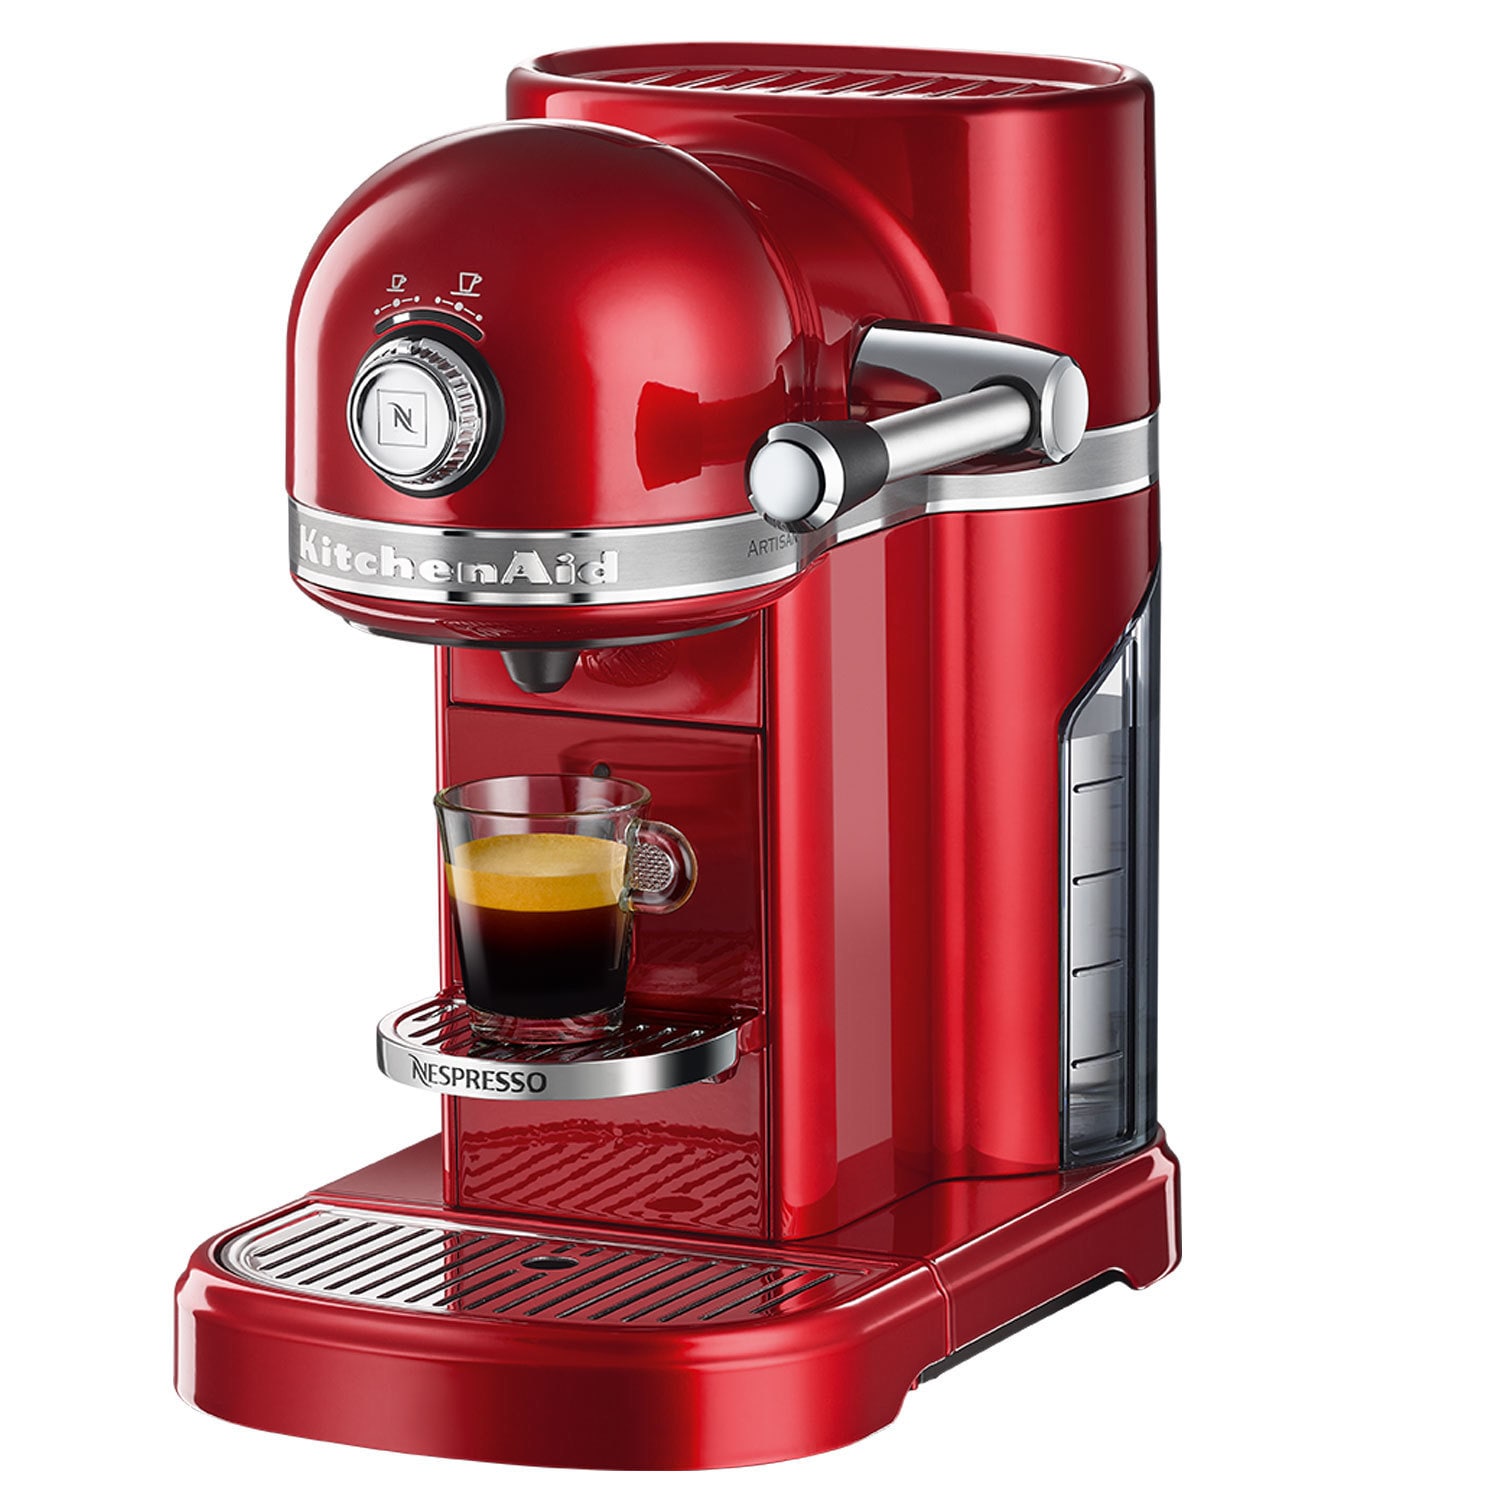 https://ak1.ostkcdn.com/images/products/11905523/KitchenAid-Candy-Apple-Red-Nespresso-Espresso-Maker-with-Aeroccino-Milk-Frother-a0dcafc5-d402-4039-93bd-f1a87c965426.jpg